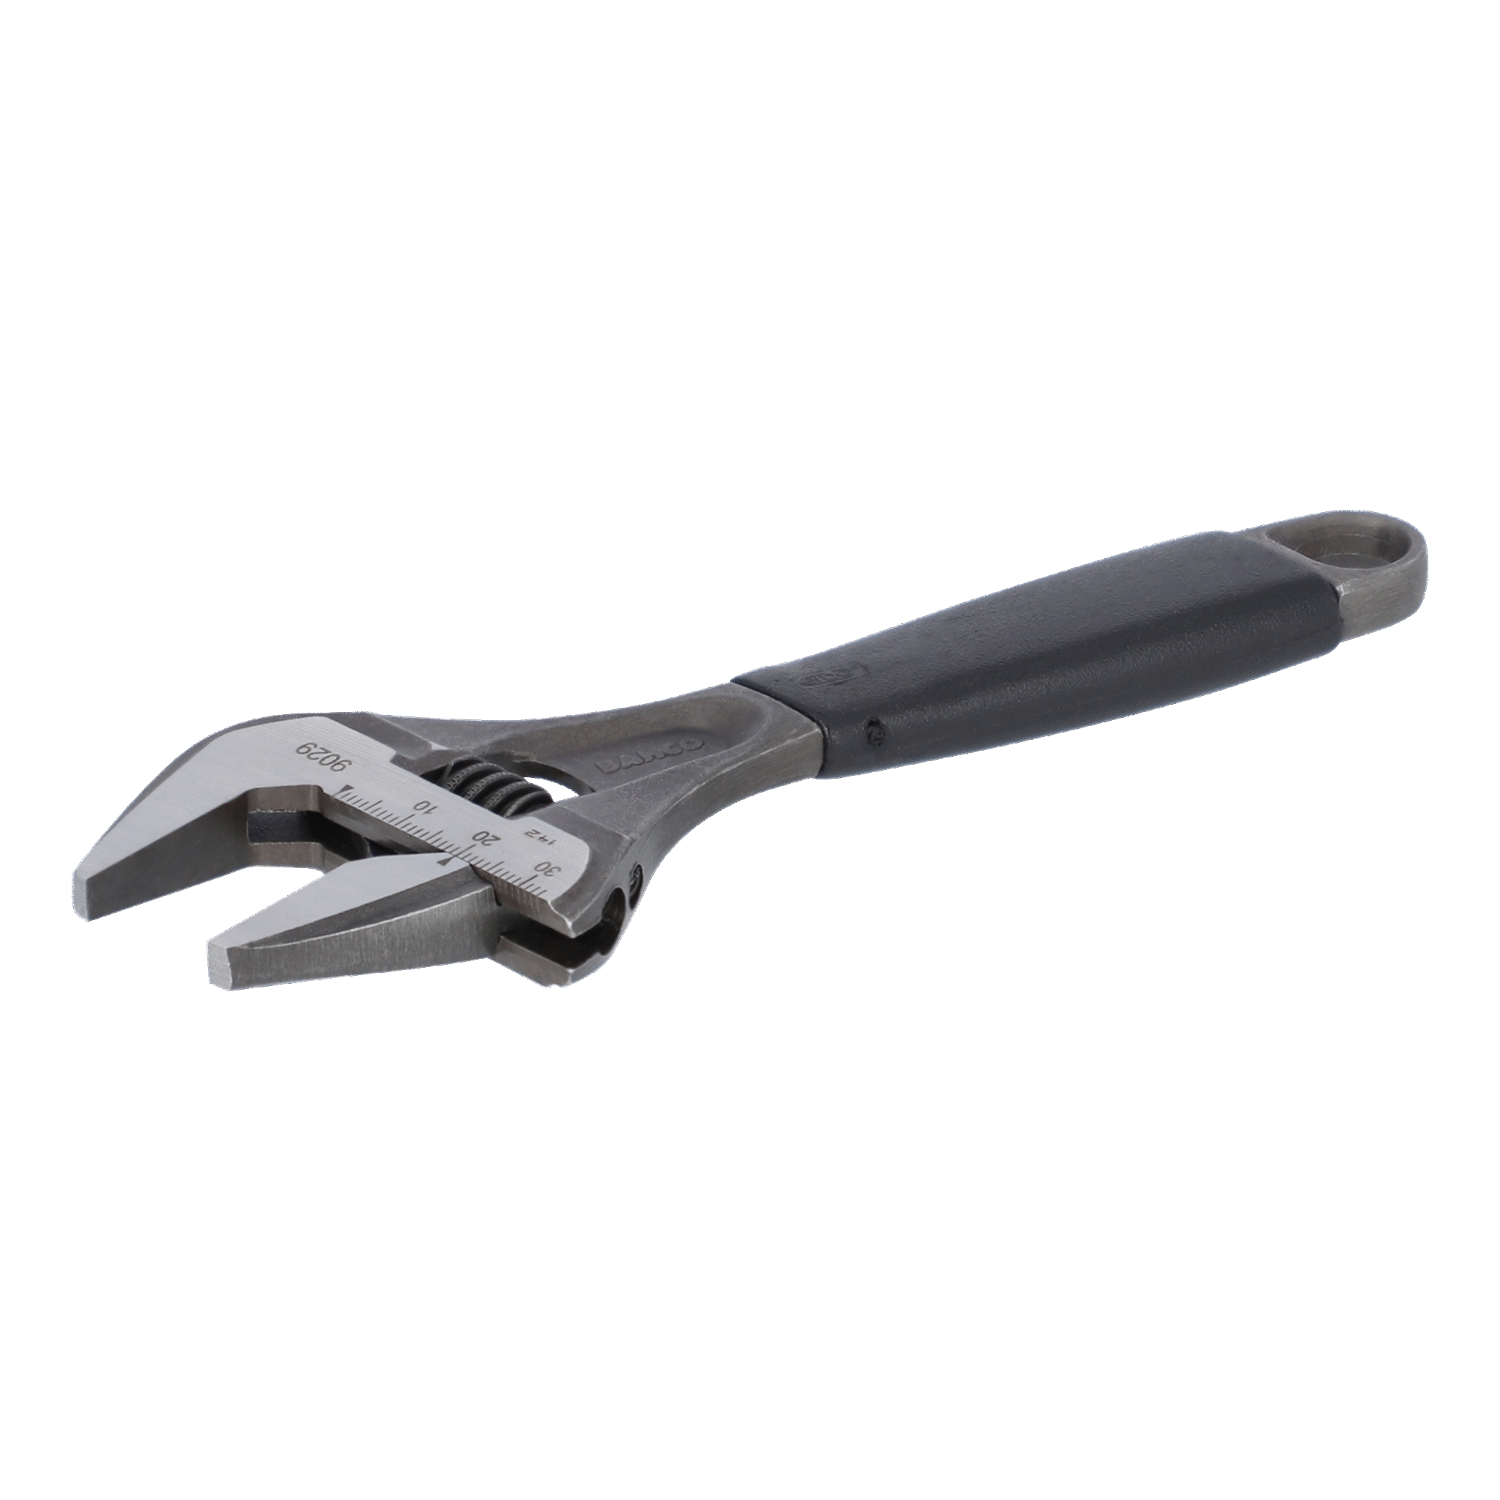 BAHCO 9029 ERGO Central Nut Wide Opening Adjustable Wrench - Premium Adjustable Wrench from BAHCO - Shop now at Yew Aik.